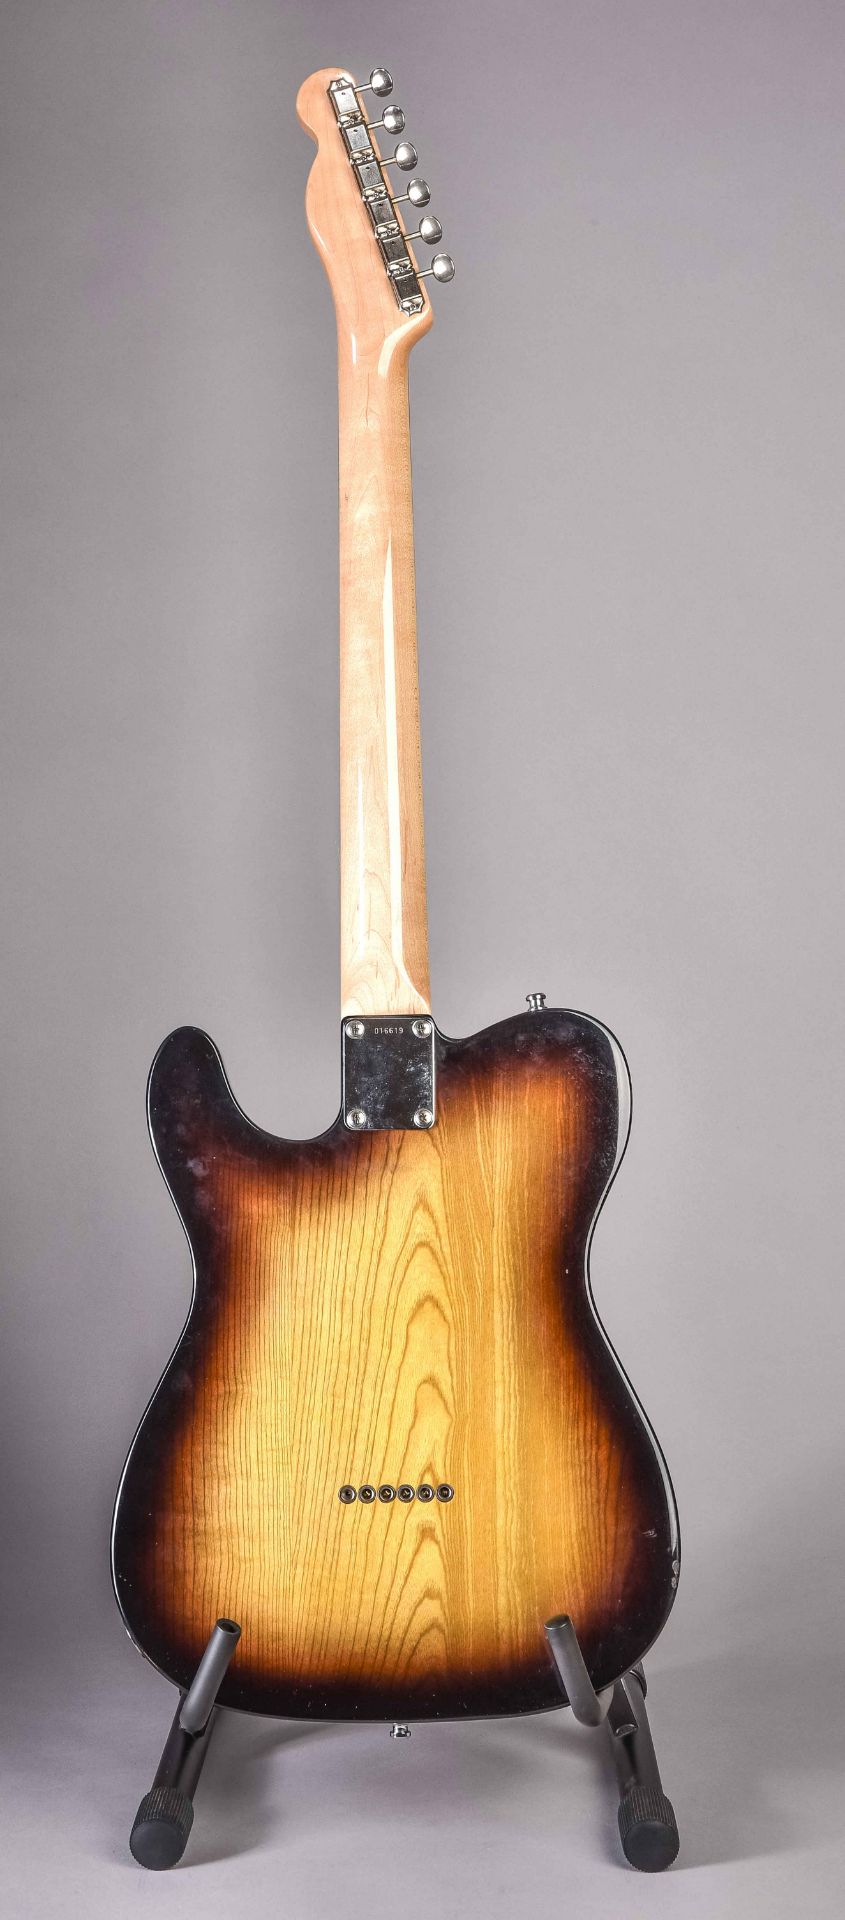 Electric guitar, Tokai "Breezysound" (Tele). Light brown, black rimmed sunburst solid body with whi - Image 9 of 14